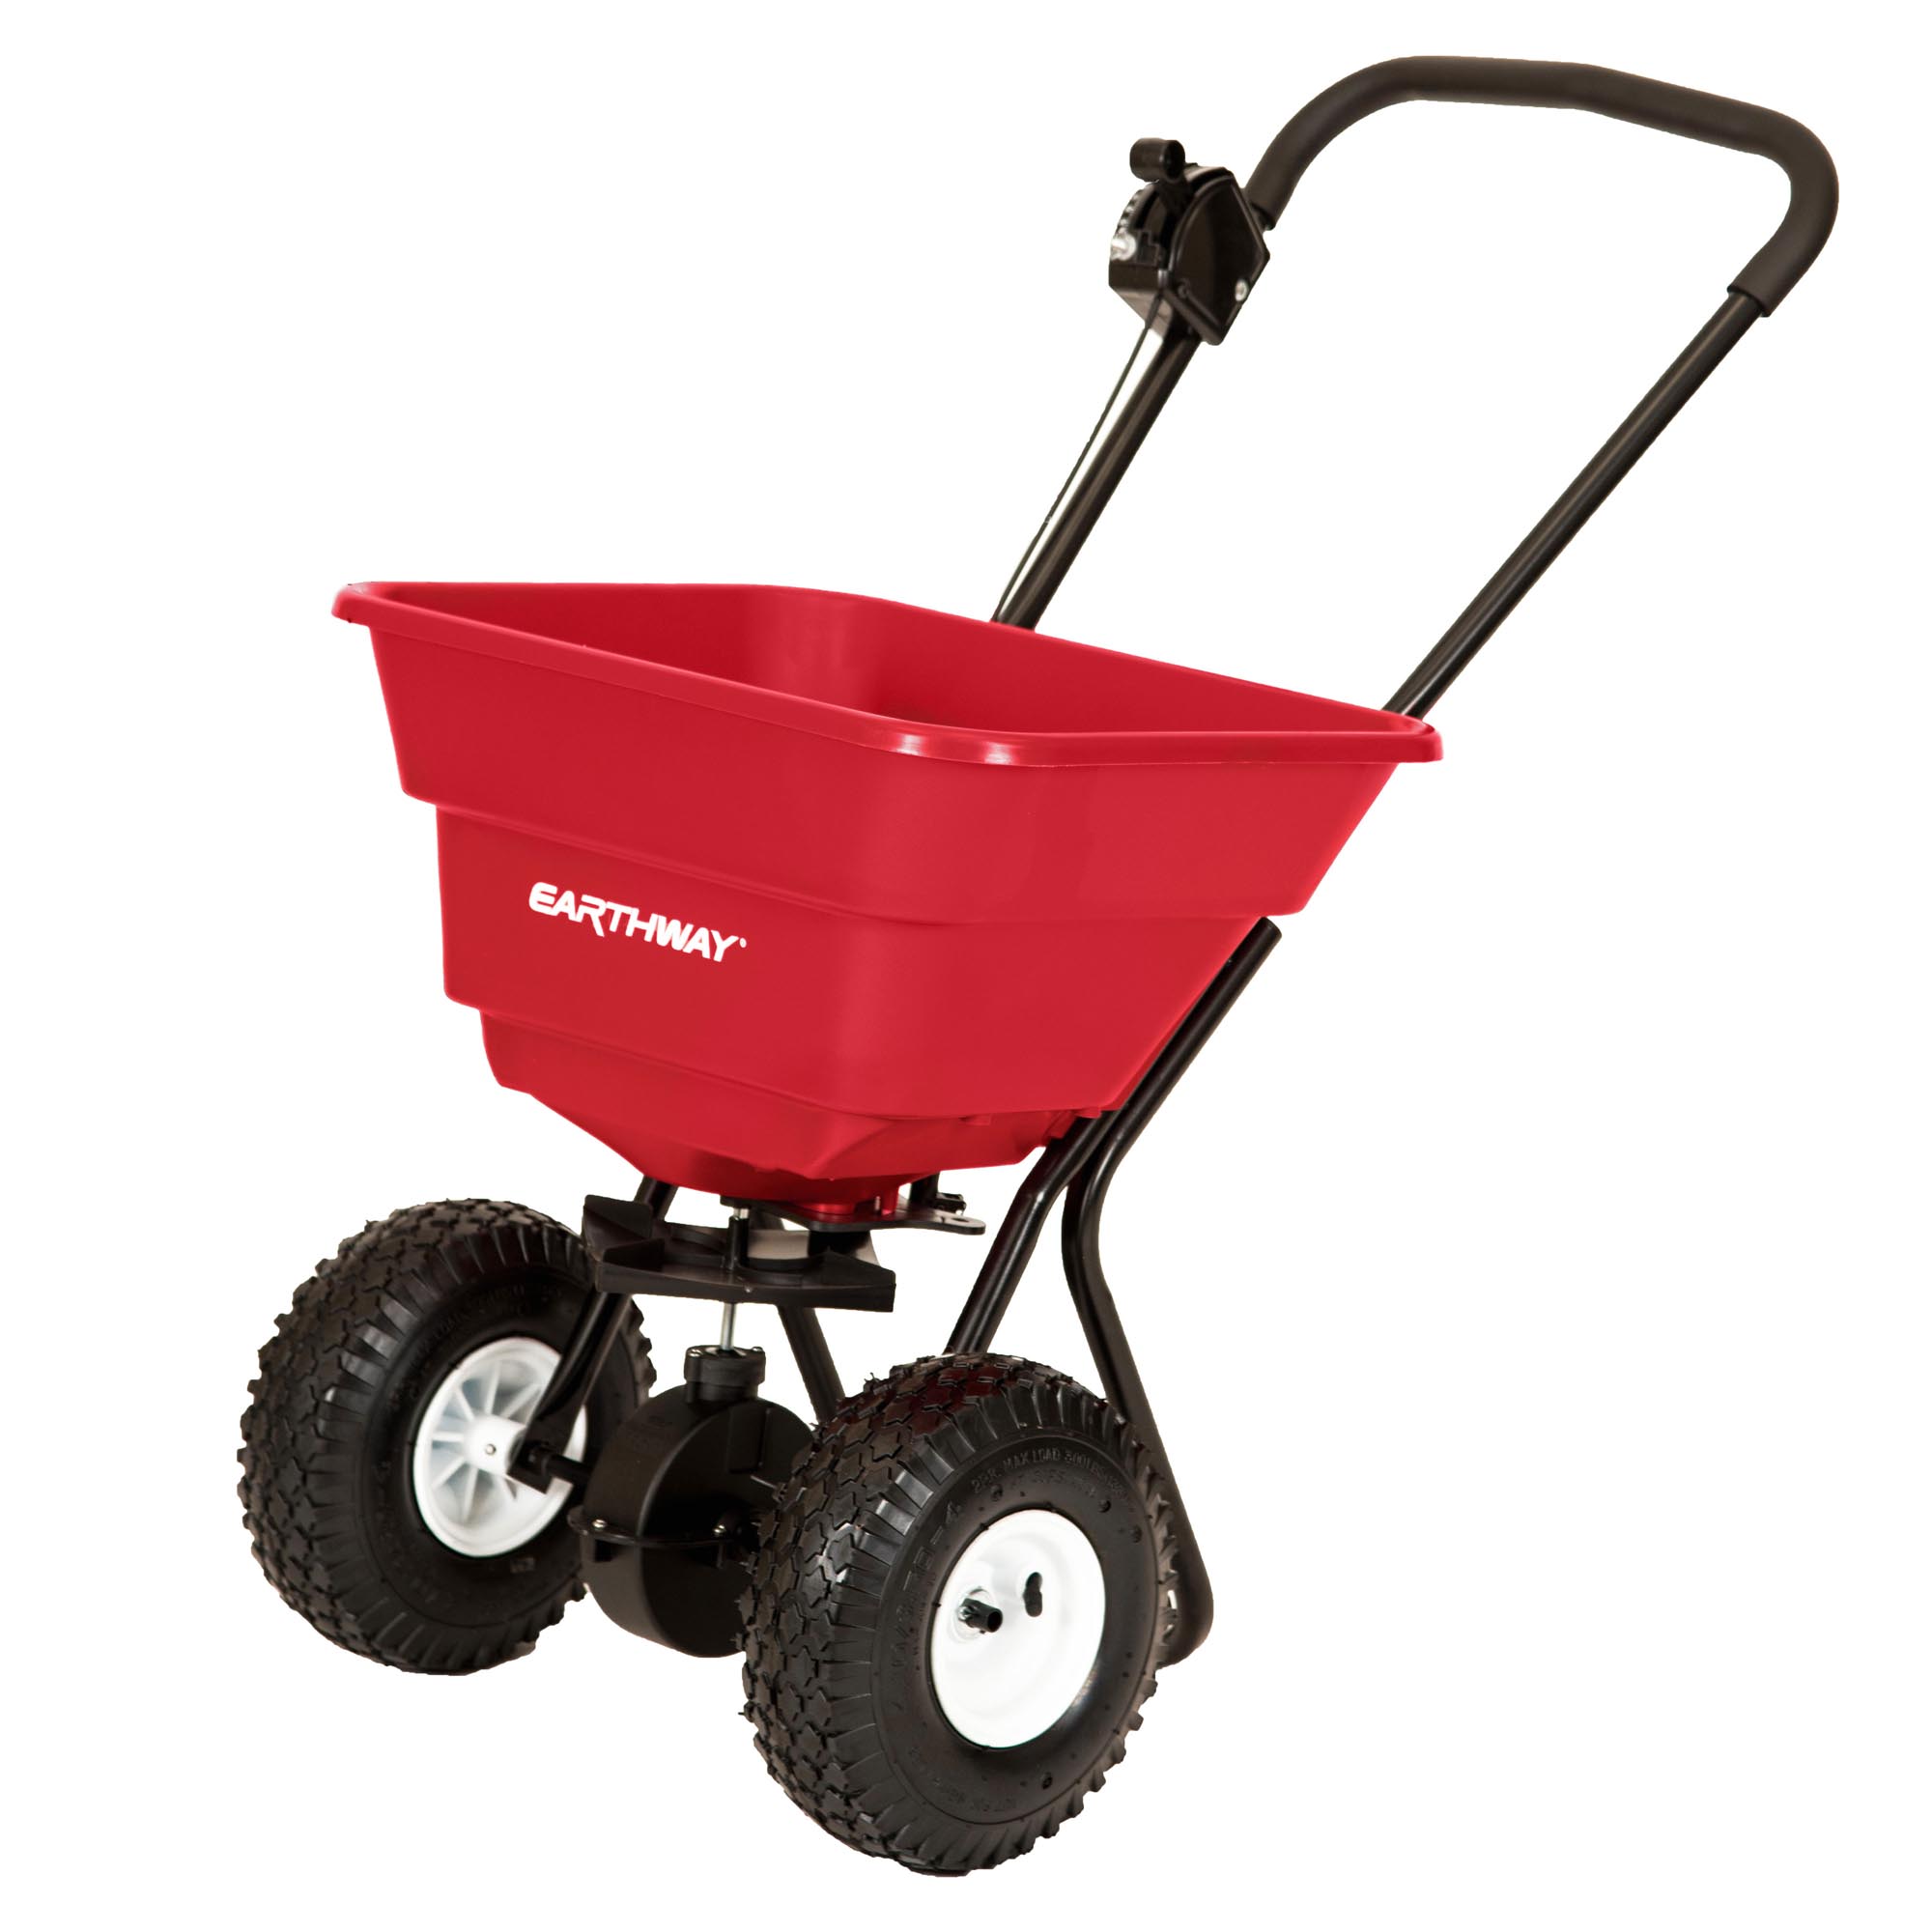 80lb Commercial Broadcast Spreader with Pneumatic Tires